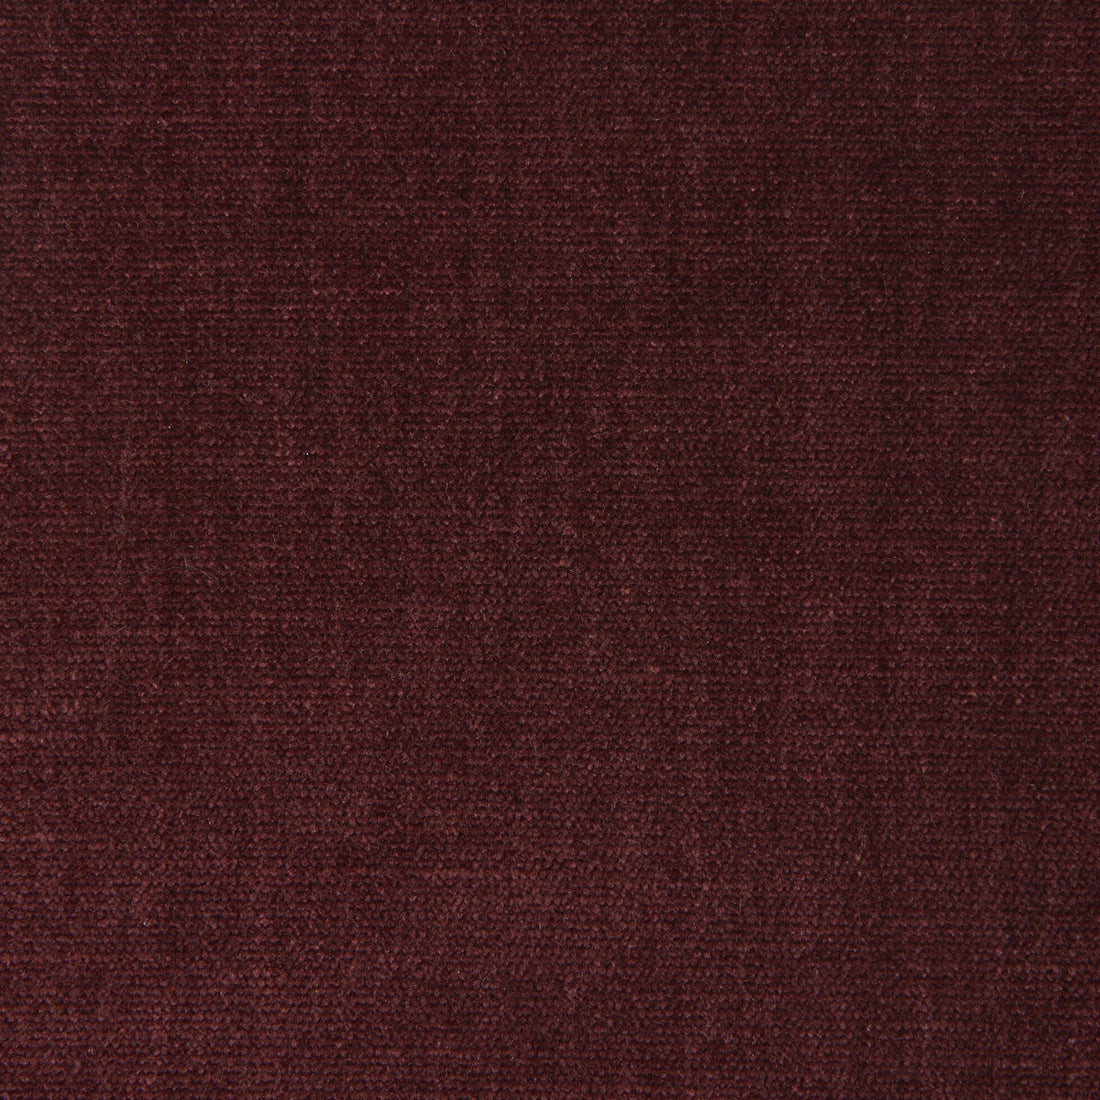 Kravet Smart fabric in 36076-97 color - pattern 36076.97.0 - by Kravet Smart in the Sumptuous Chenille II collection